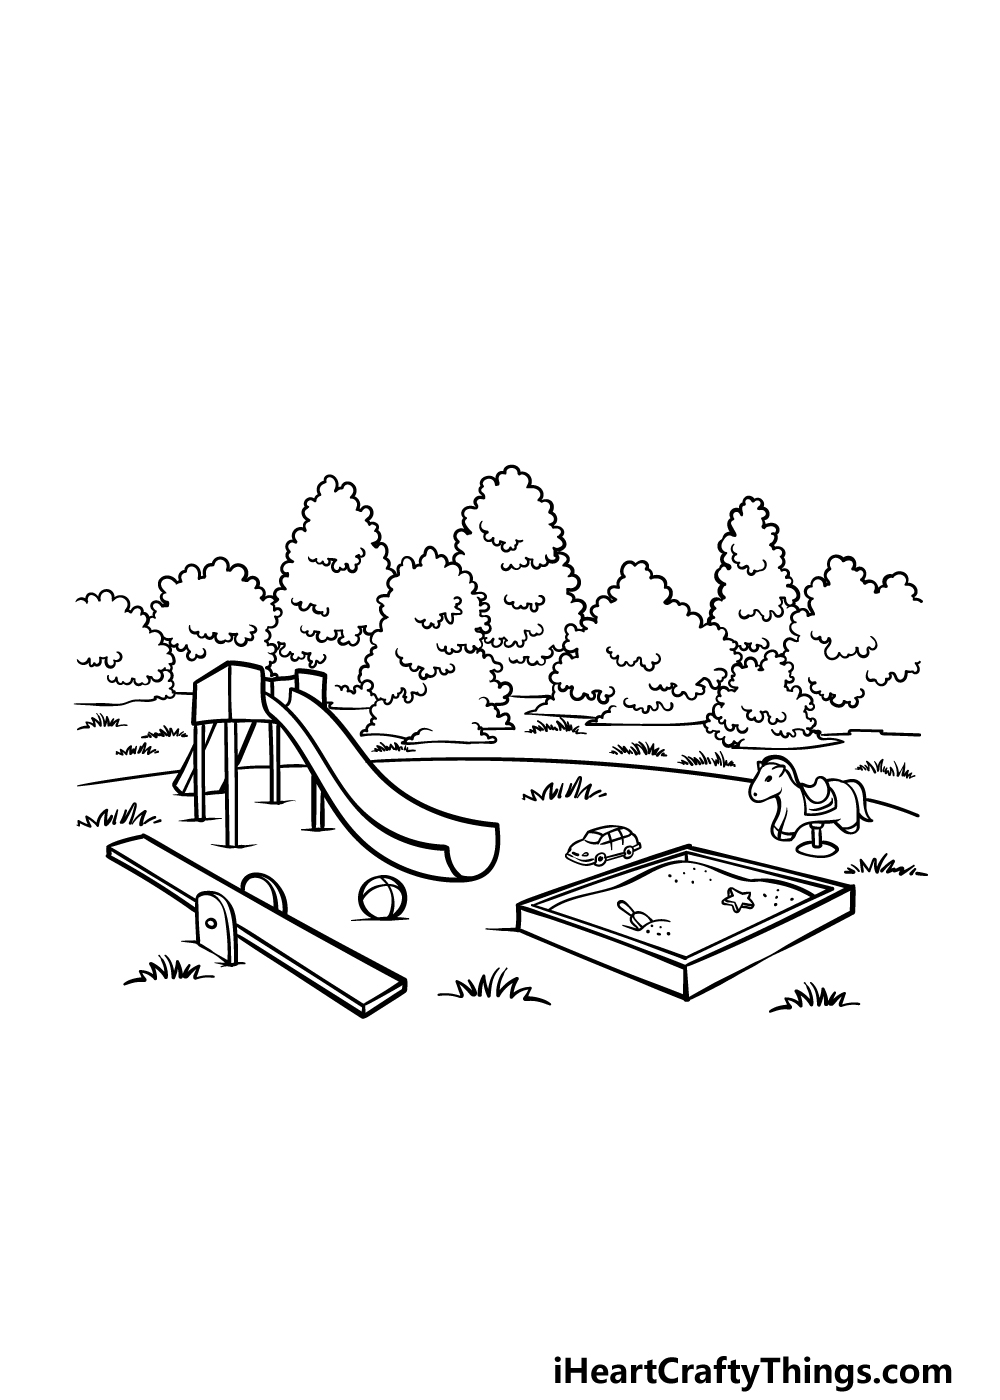 how to draw a Playground step 5